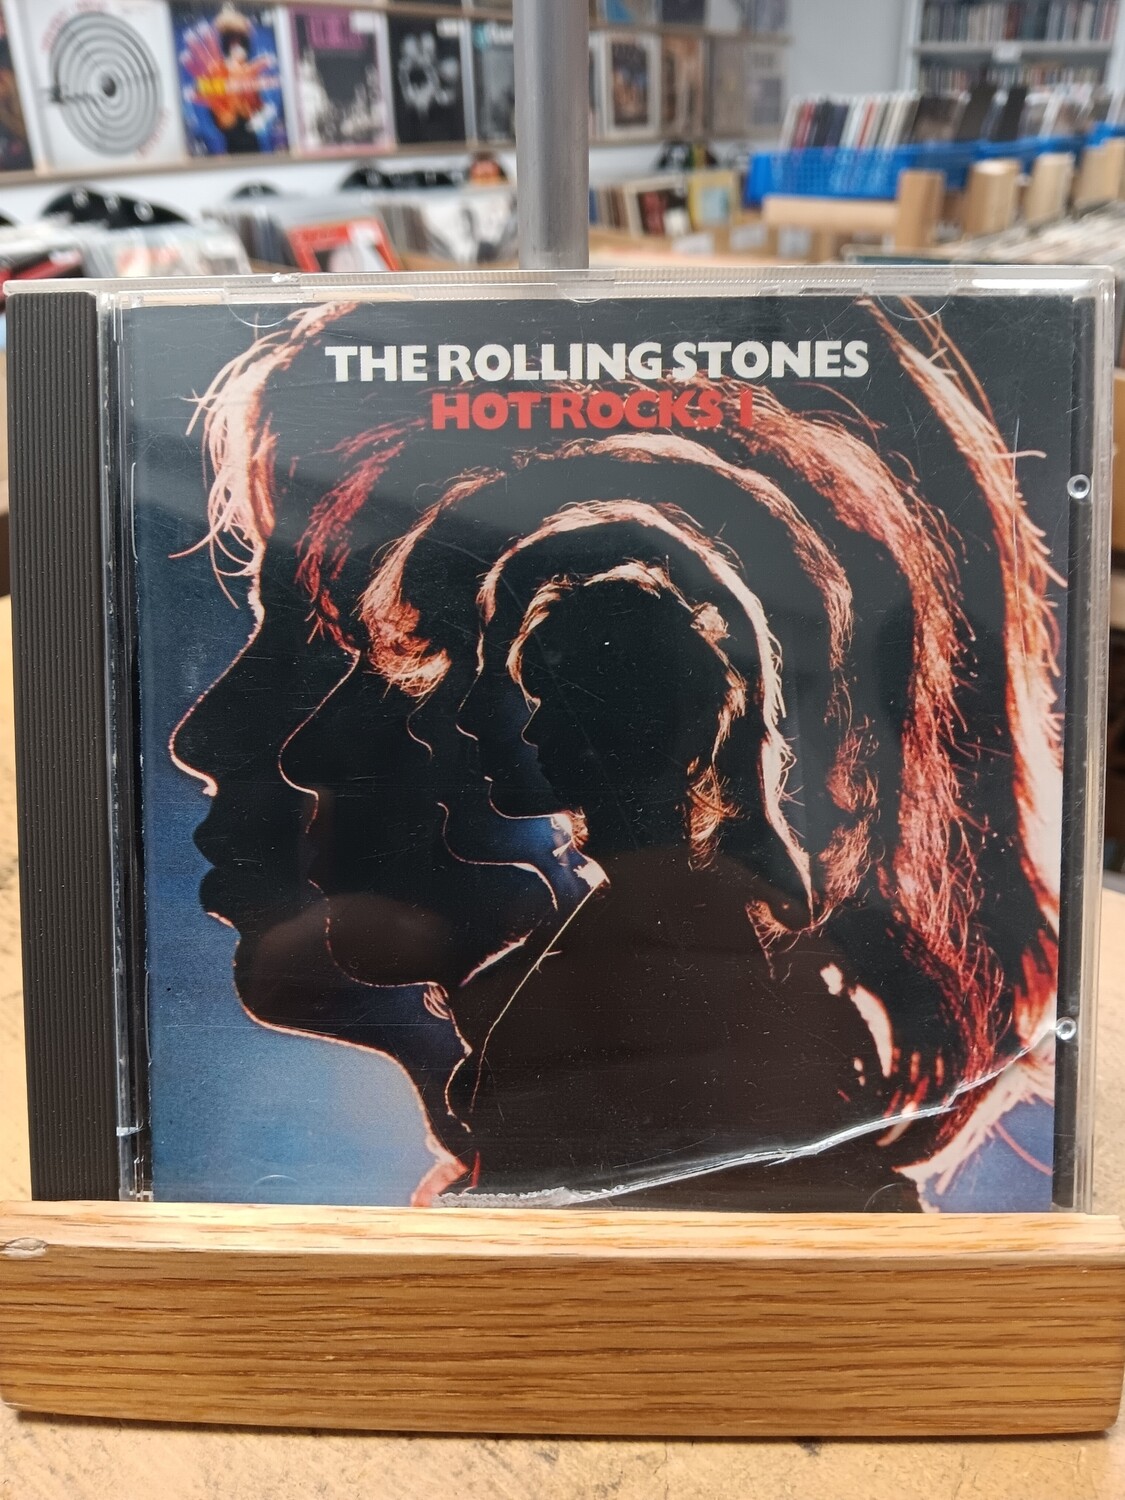 THE ROLLING STONES - Hot Rocks 1 (CD)